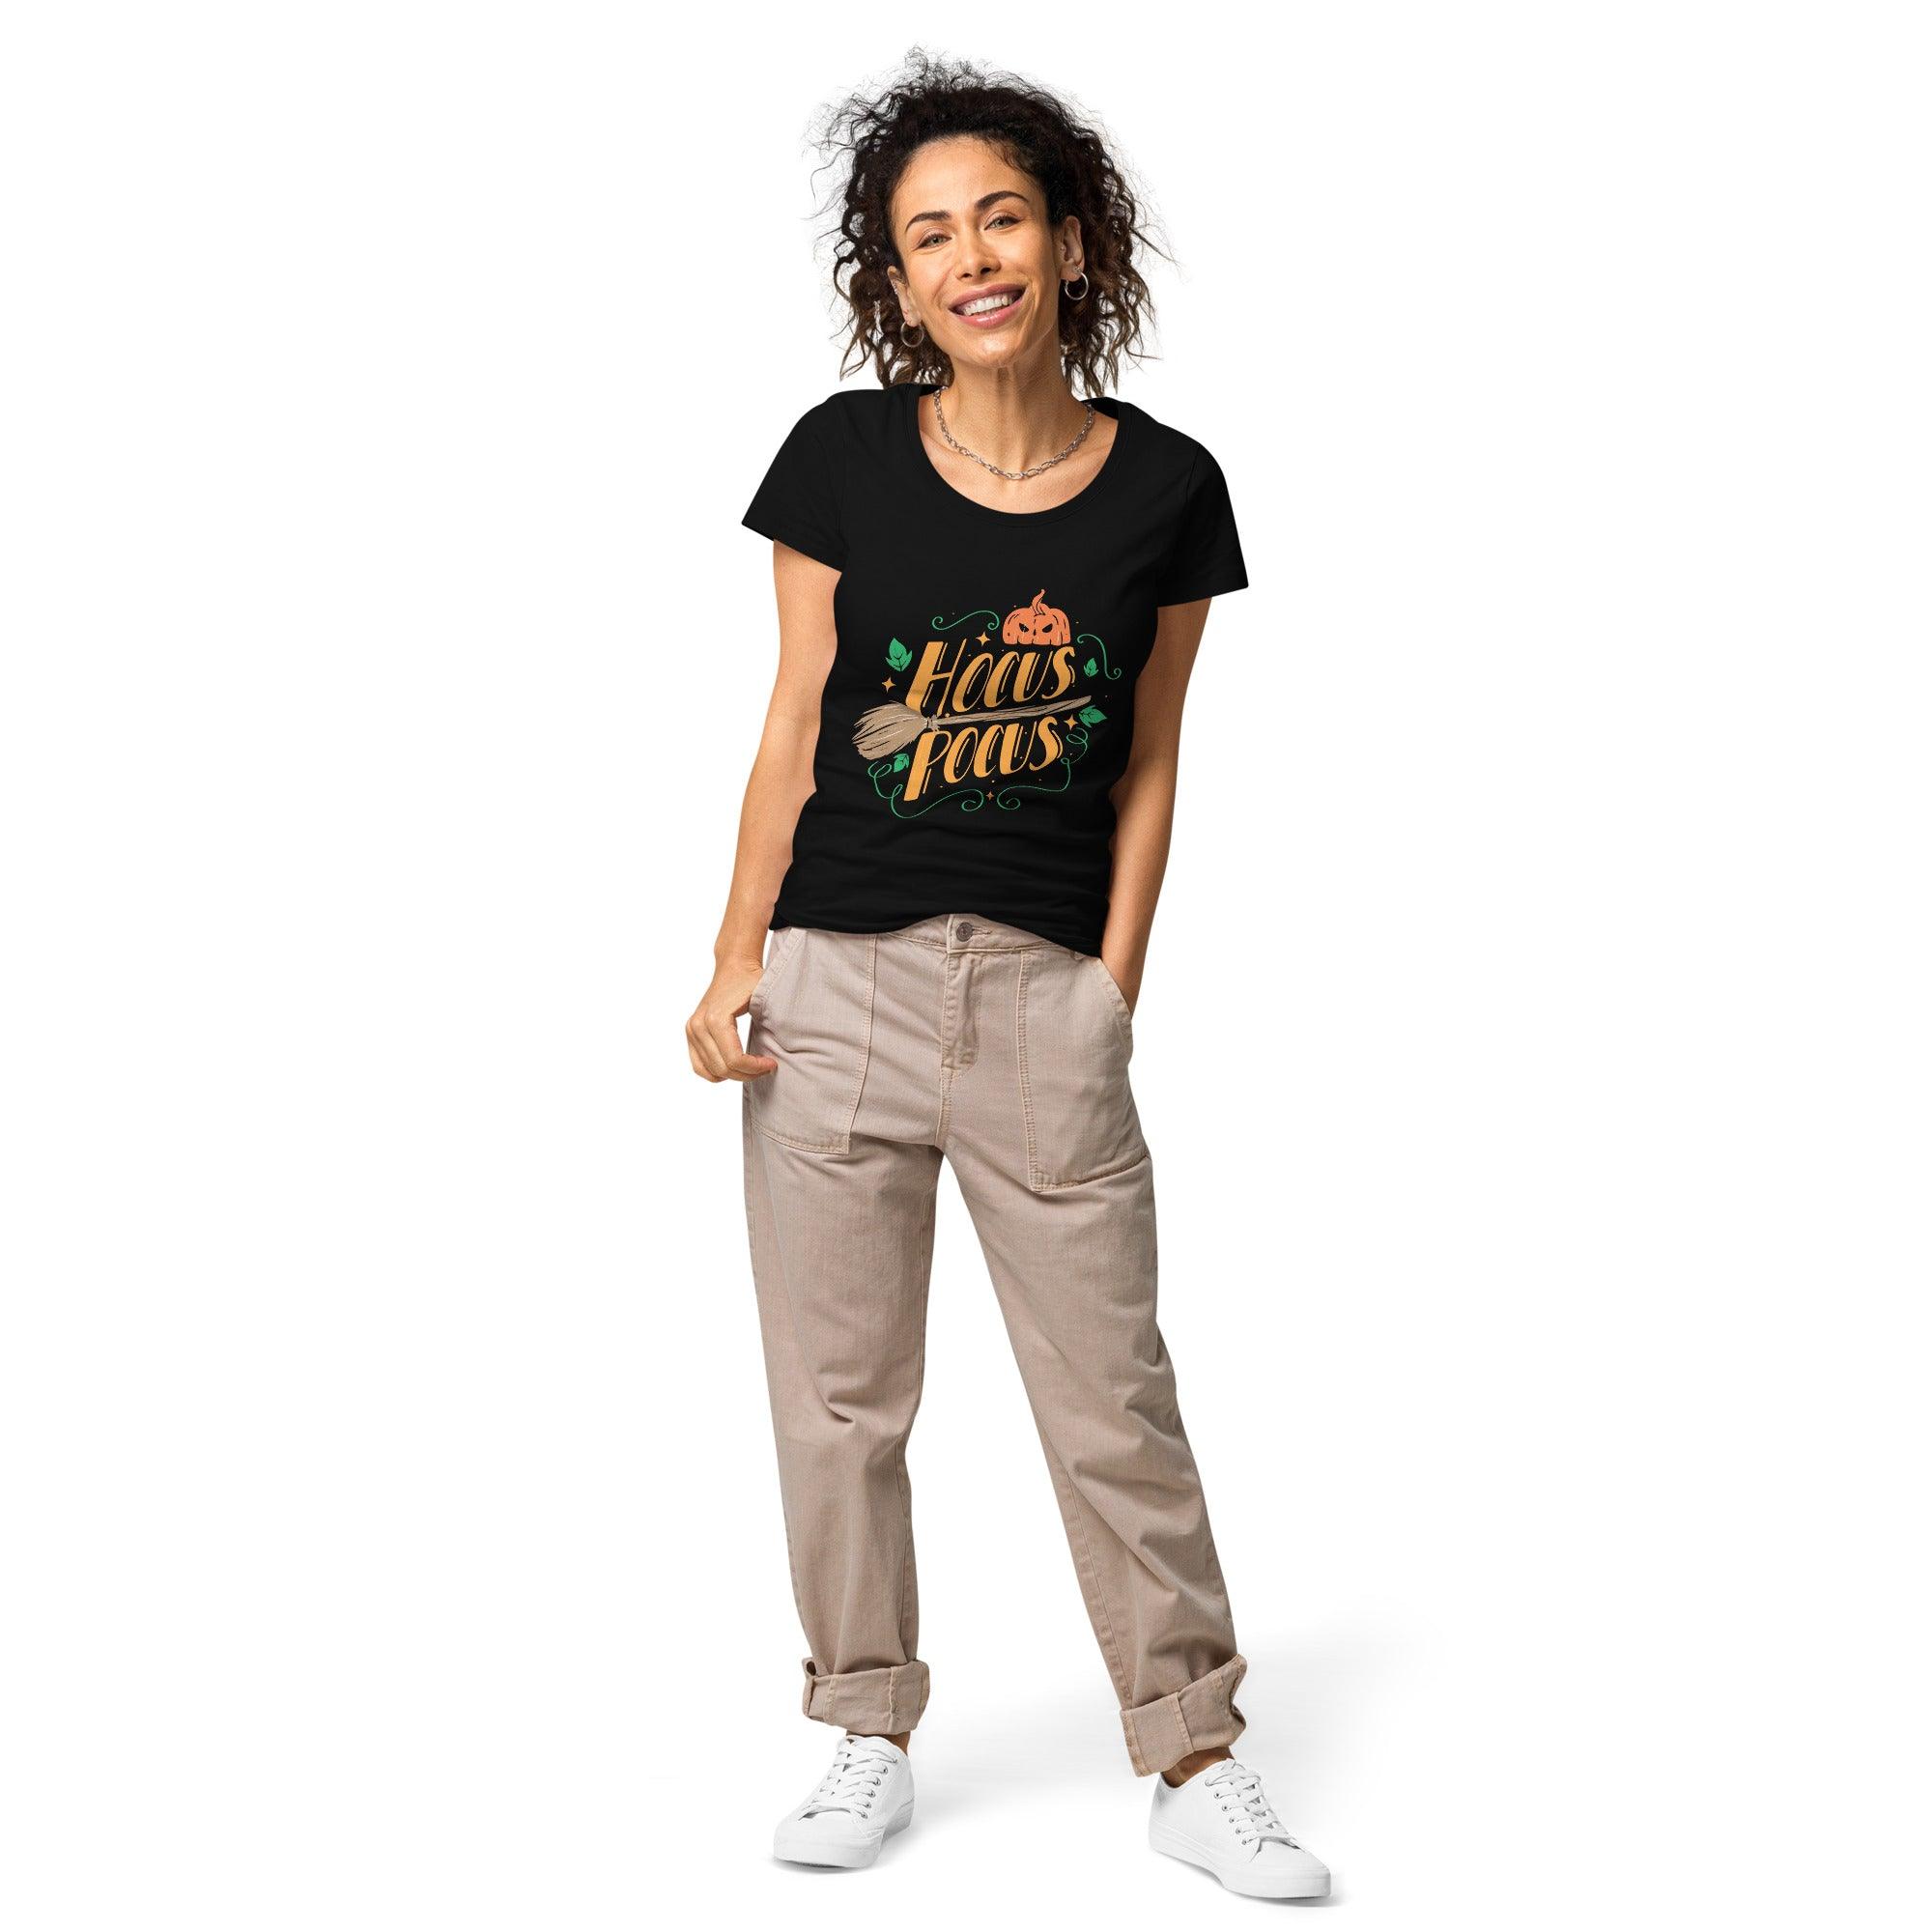 Creep It Real' Women's Organic Cotton Halloween T-Shirt laid out, showcasing the full spooky chic design for a sustainable October wardrobe.